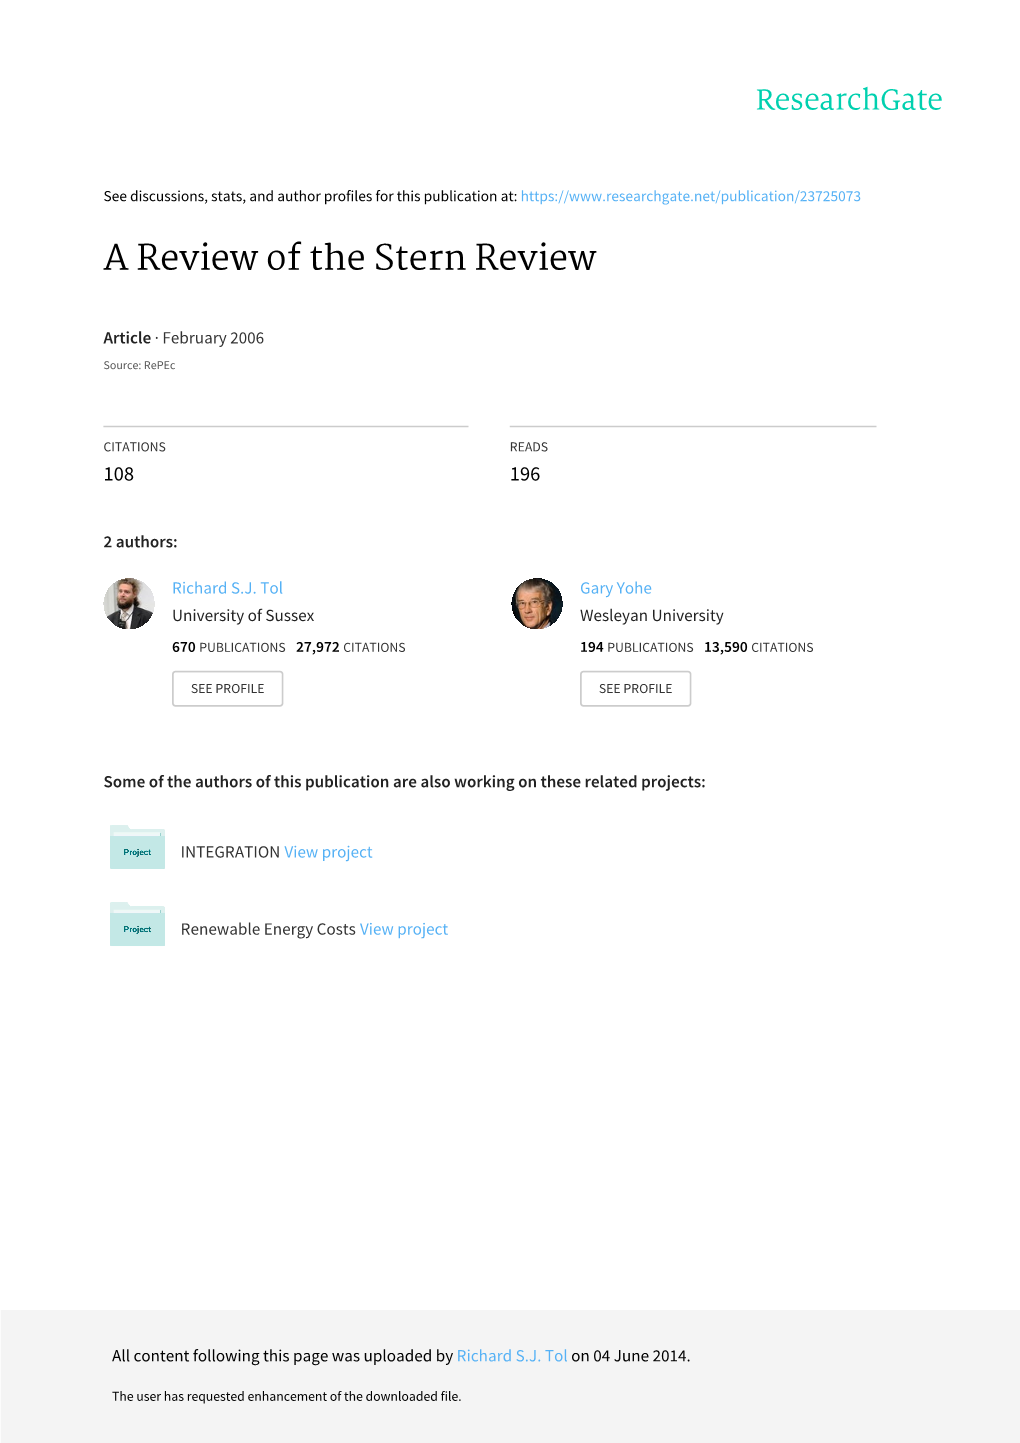 A Review of the Stern Review